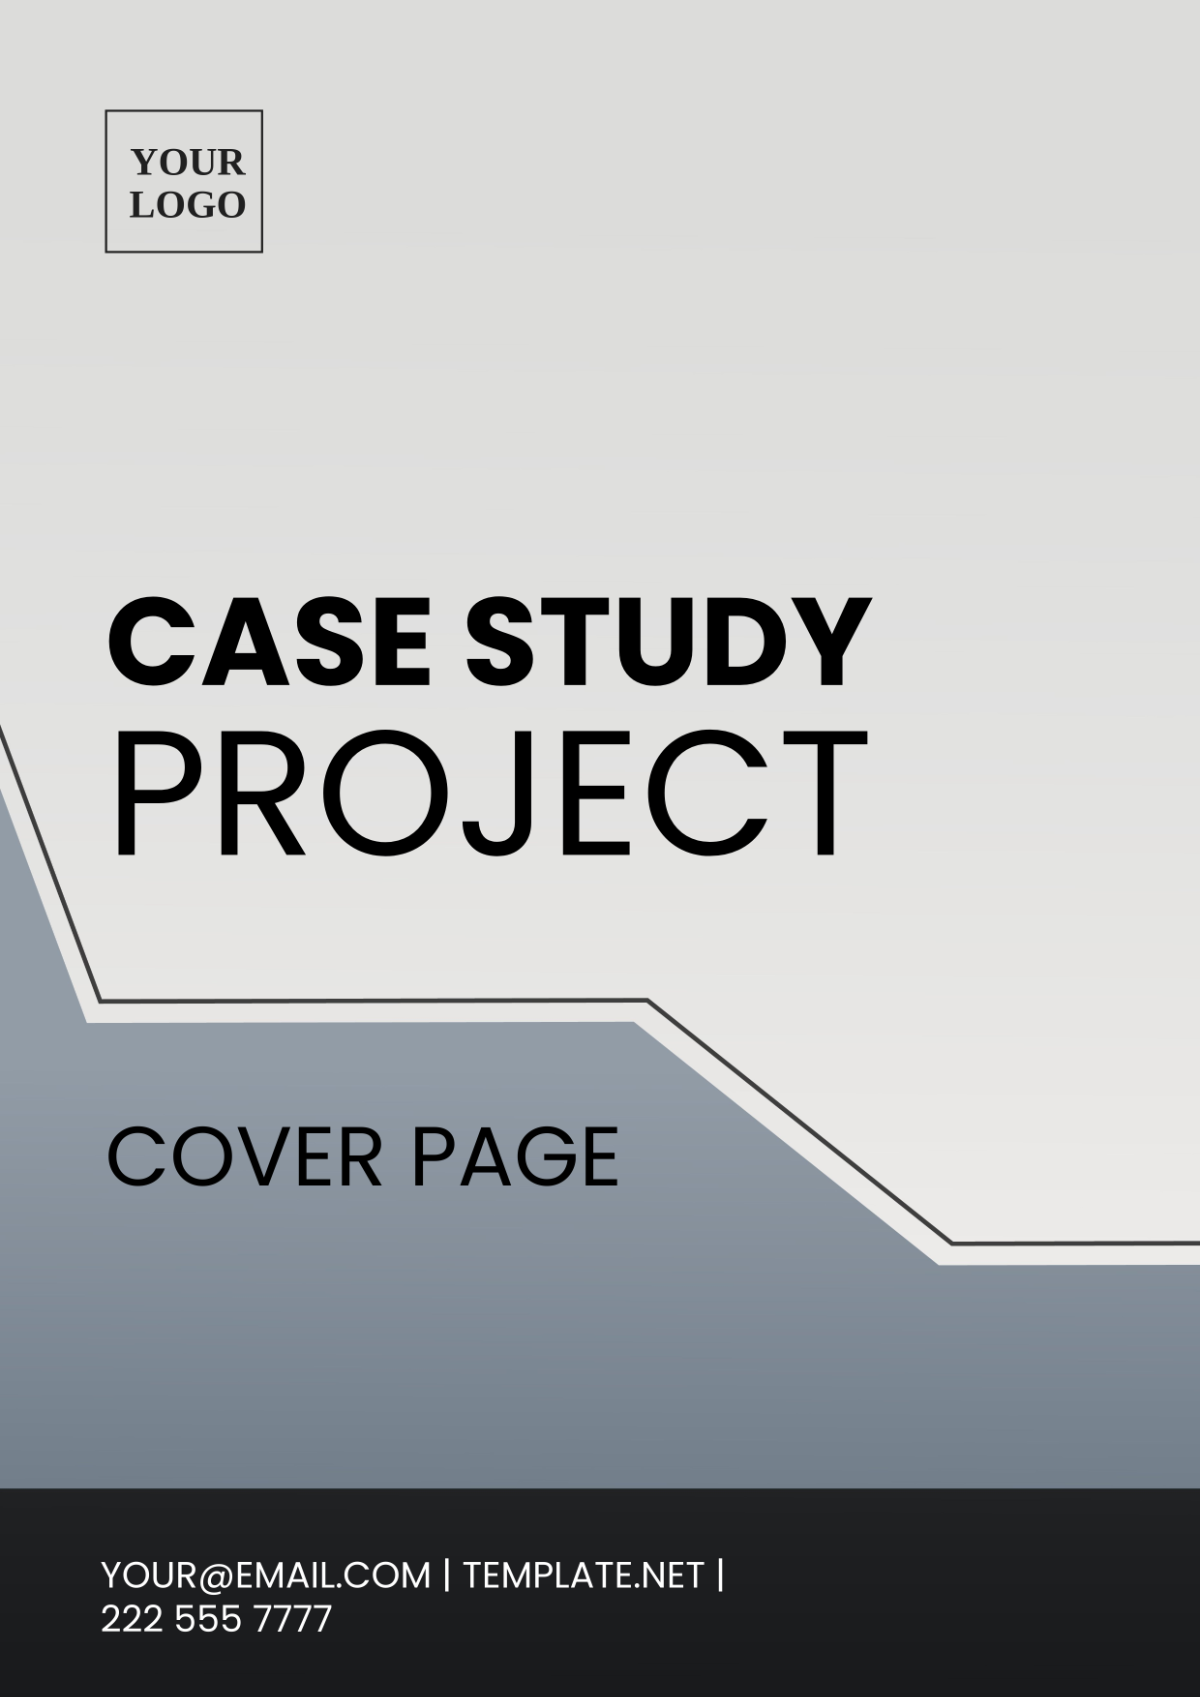 Case Study Project Cover Page Template